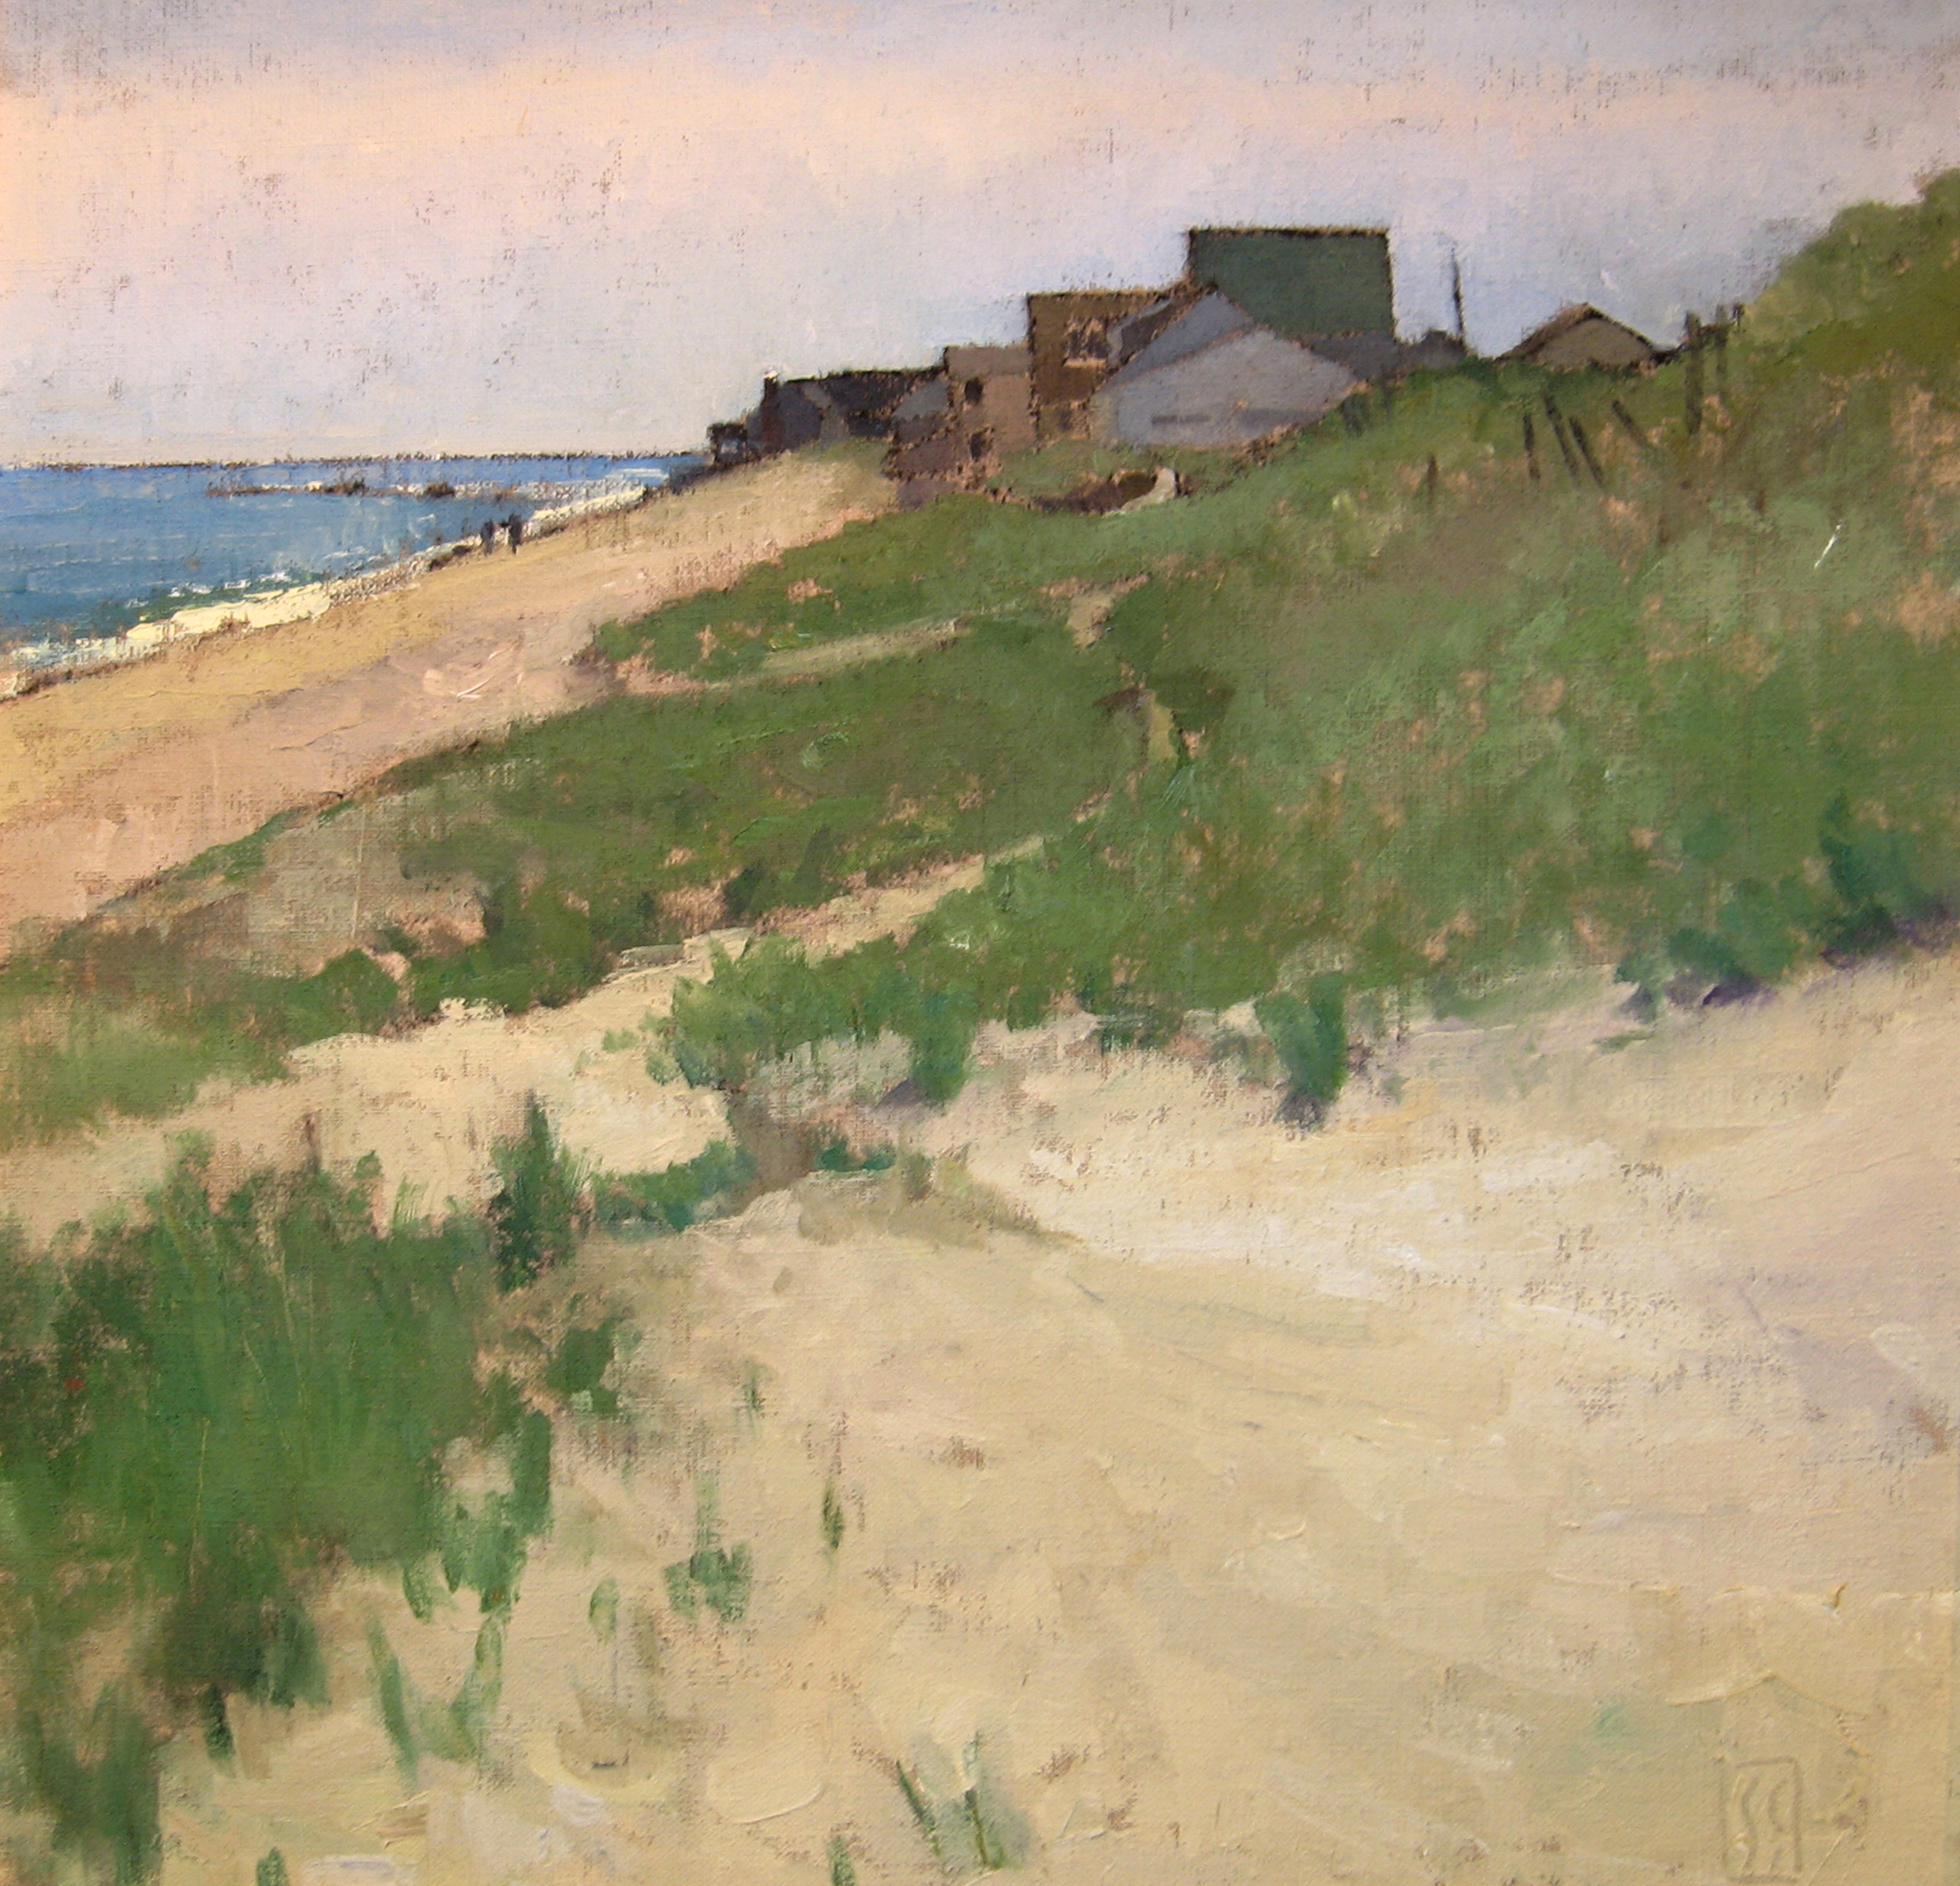   Rexhame Dunes  24 x 24 oil on linen  First Place Oil North River Arts Society  sold 